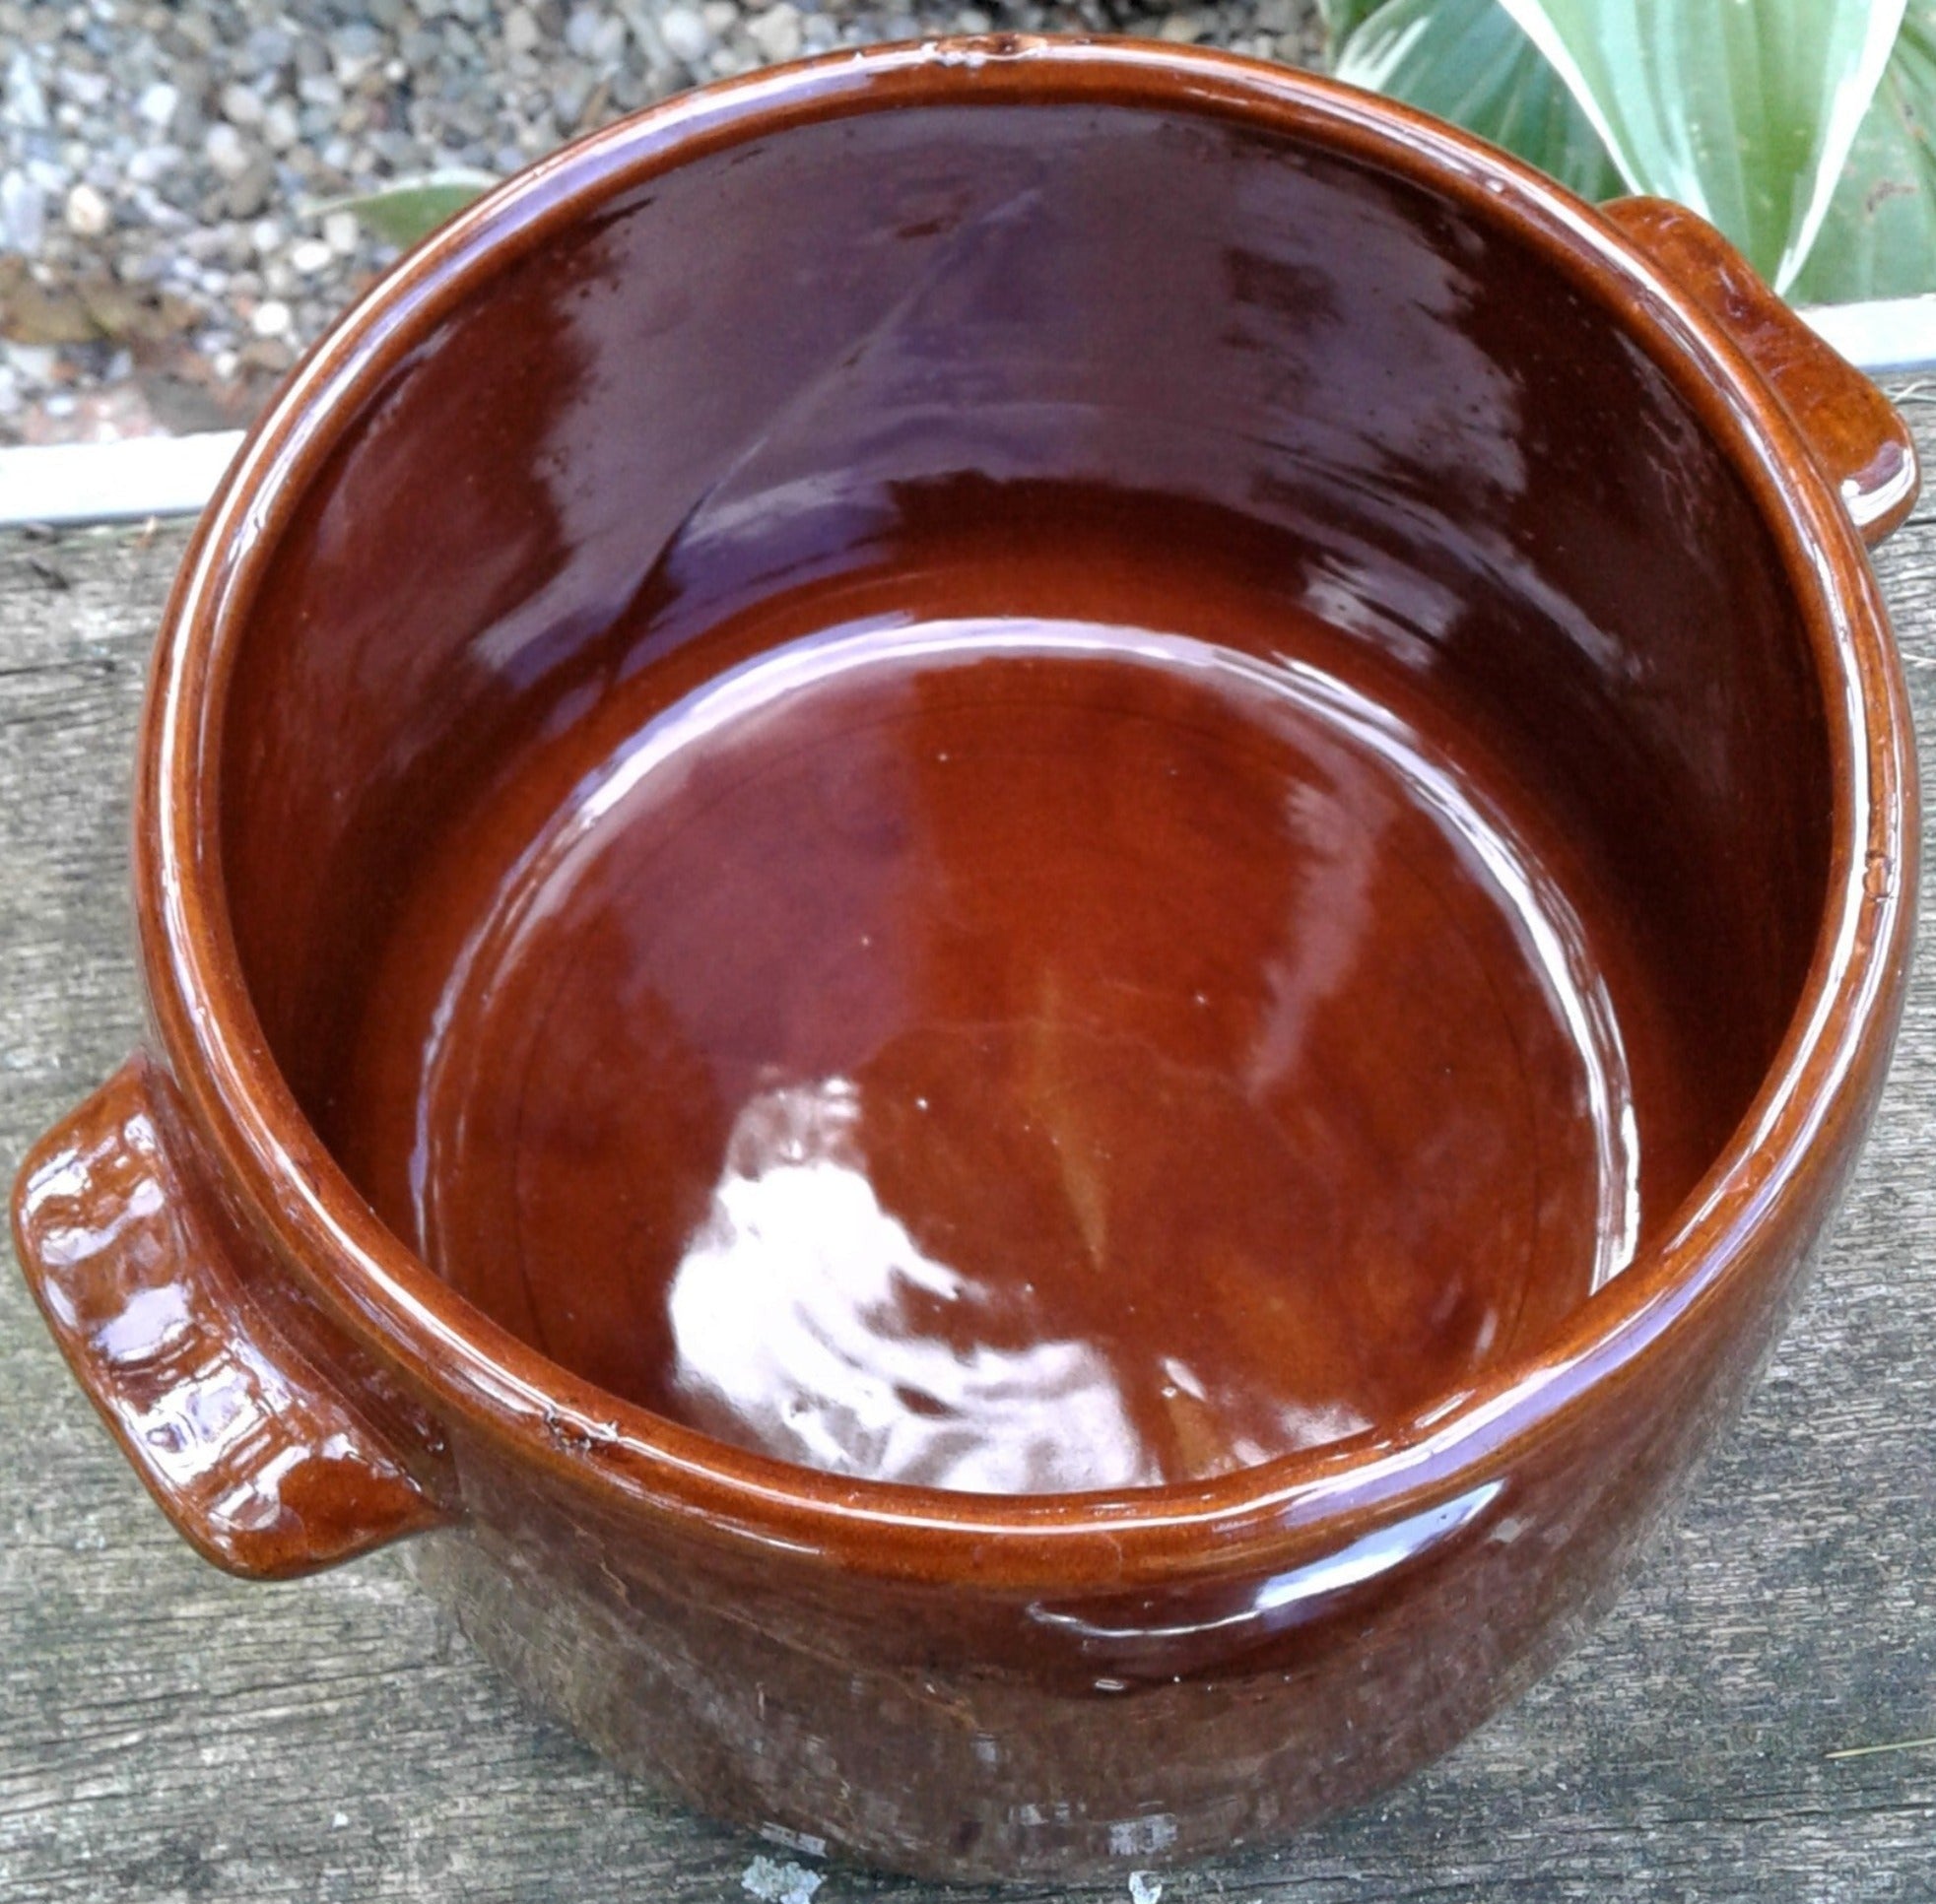 Vintage WEST BEND Glazed Ceramic Crock Pot, Bean Pot With Ceramic Lid, Made  in USA, Brown, Two Quart Stoneware Crock Pot, Soniacollectibles 